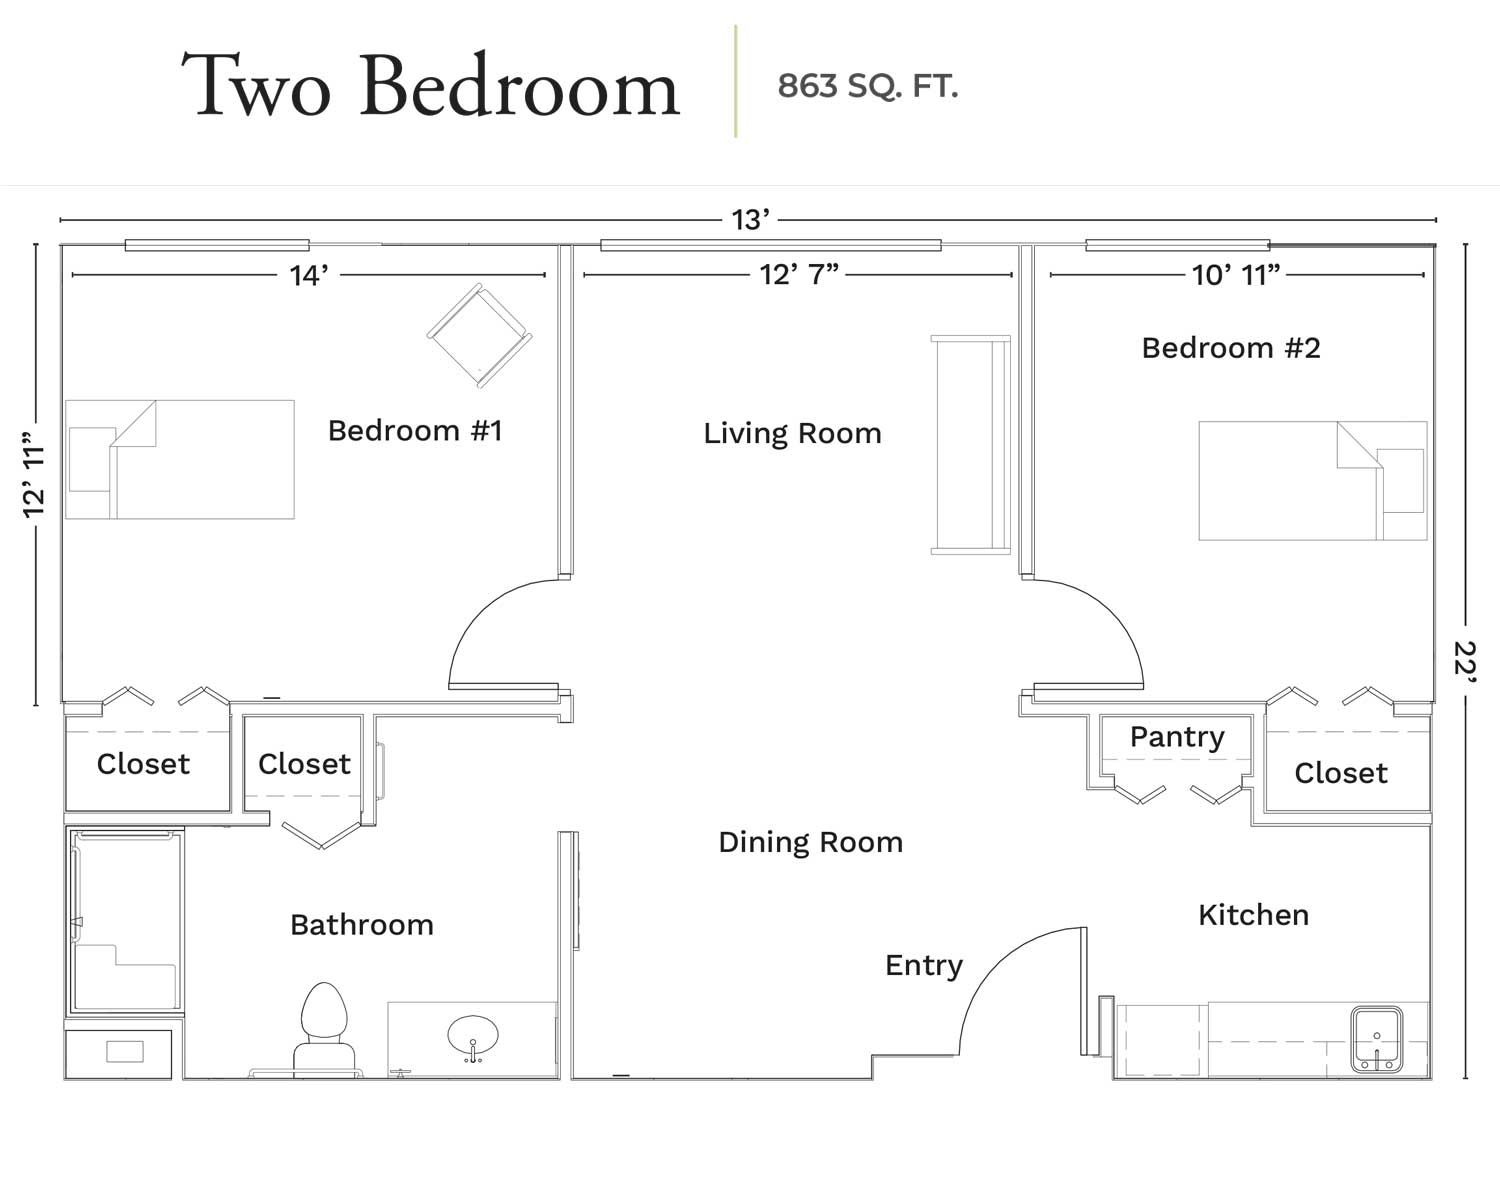 Two-bedroom unit floor plan with living room, dining room, kitchen, pantry, bathroom, and closets.